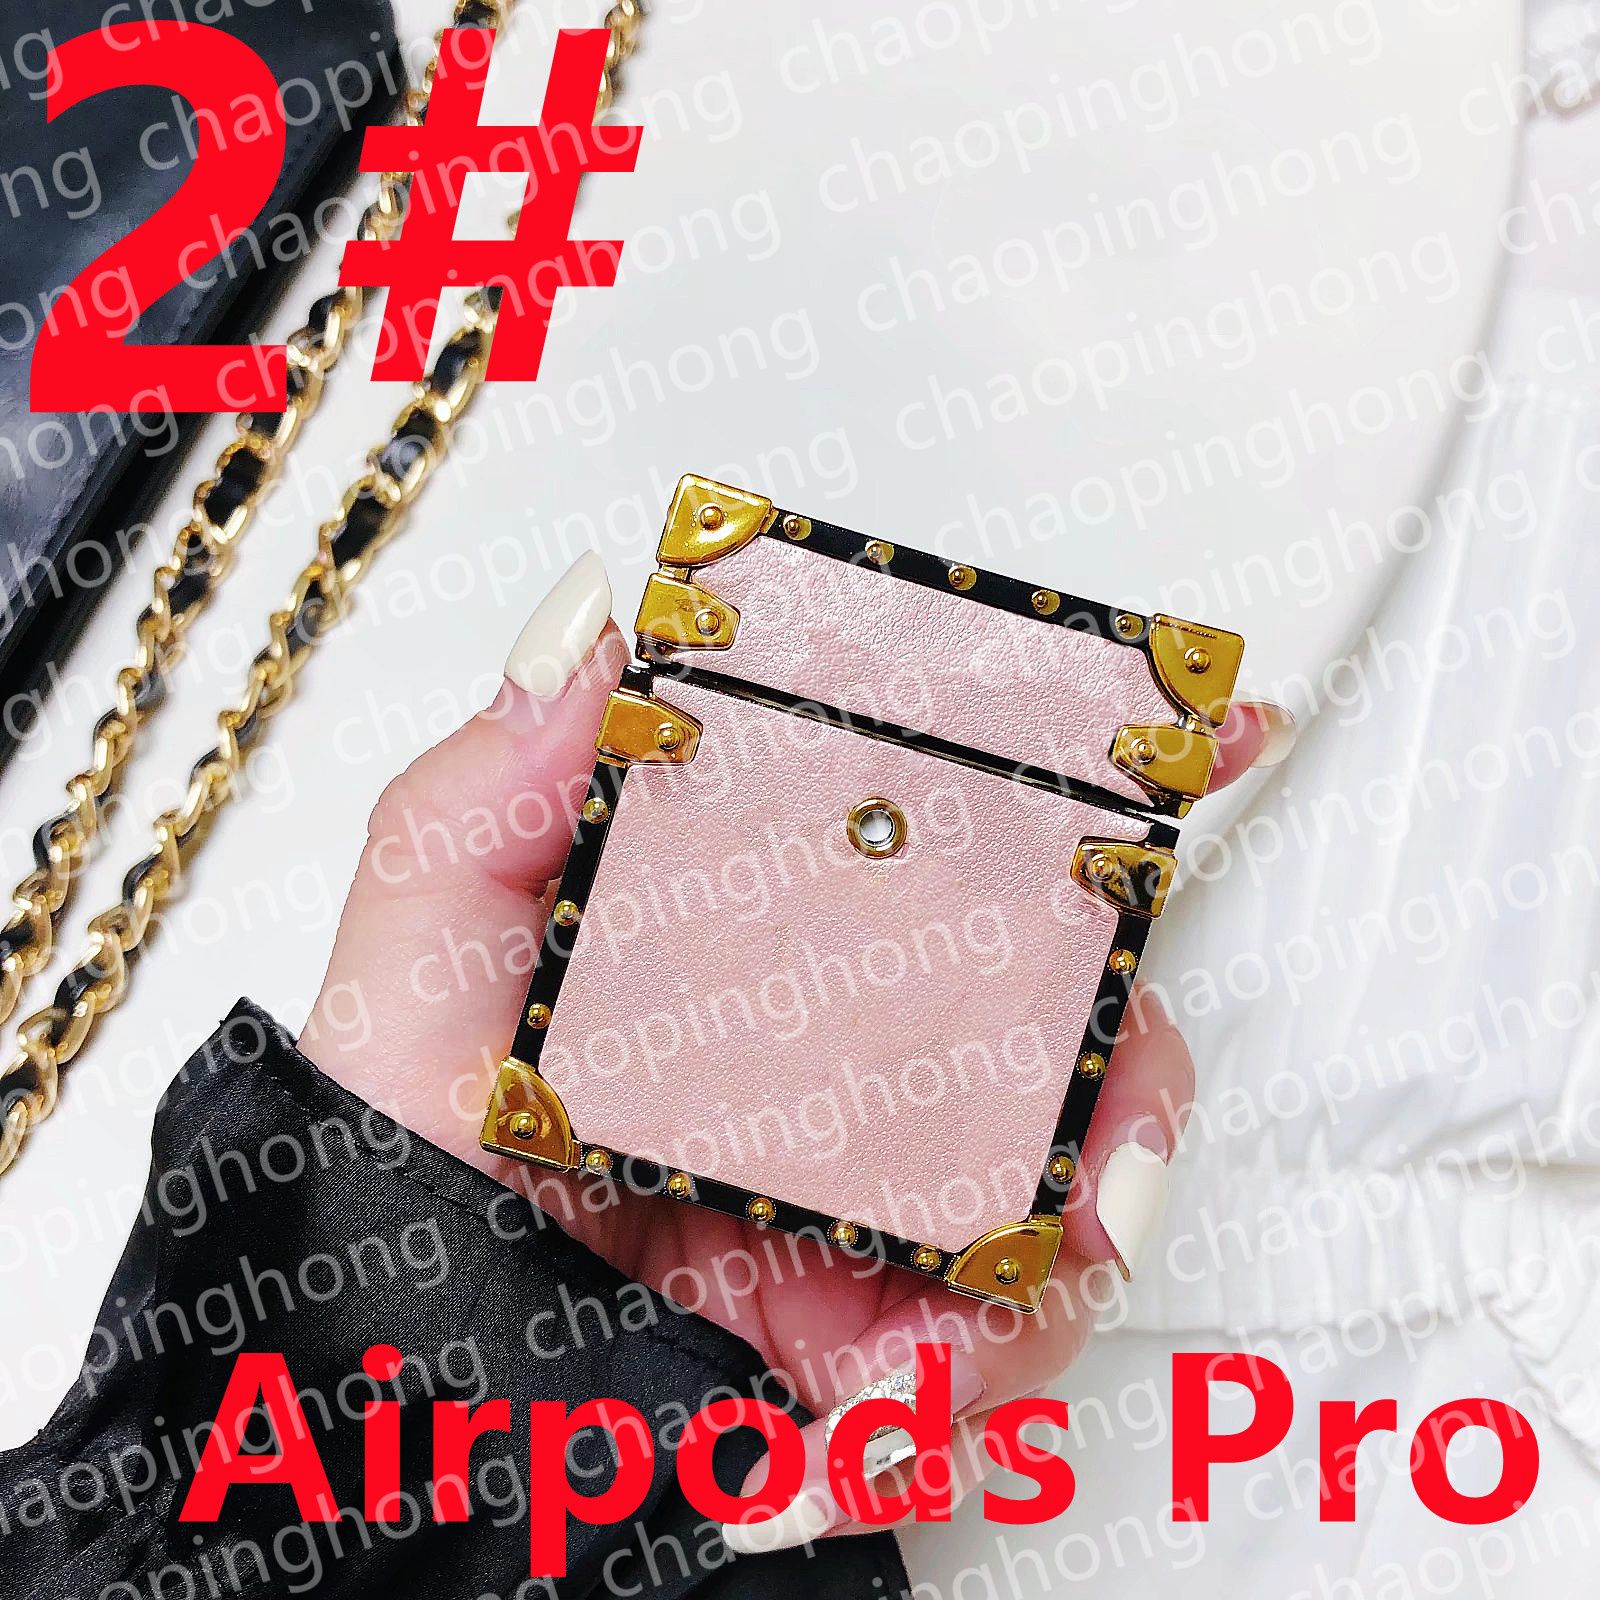 2 # [g] AirPods Pro + logo